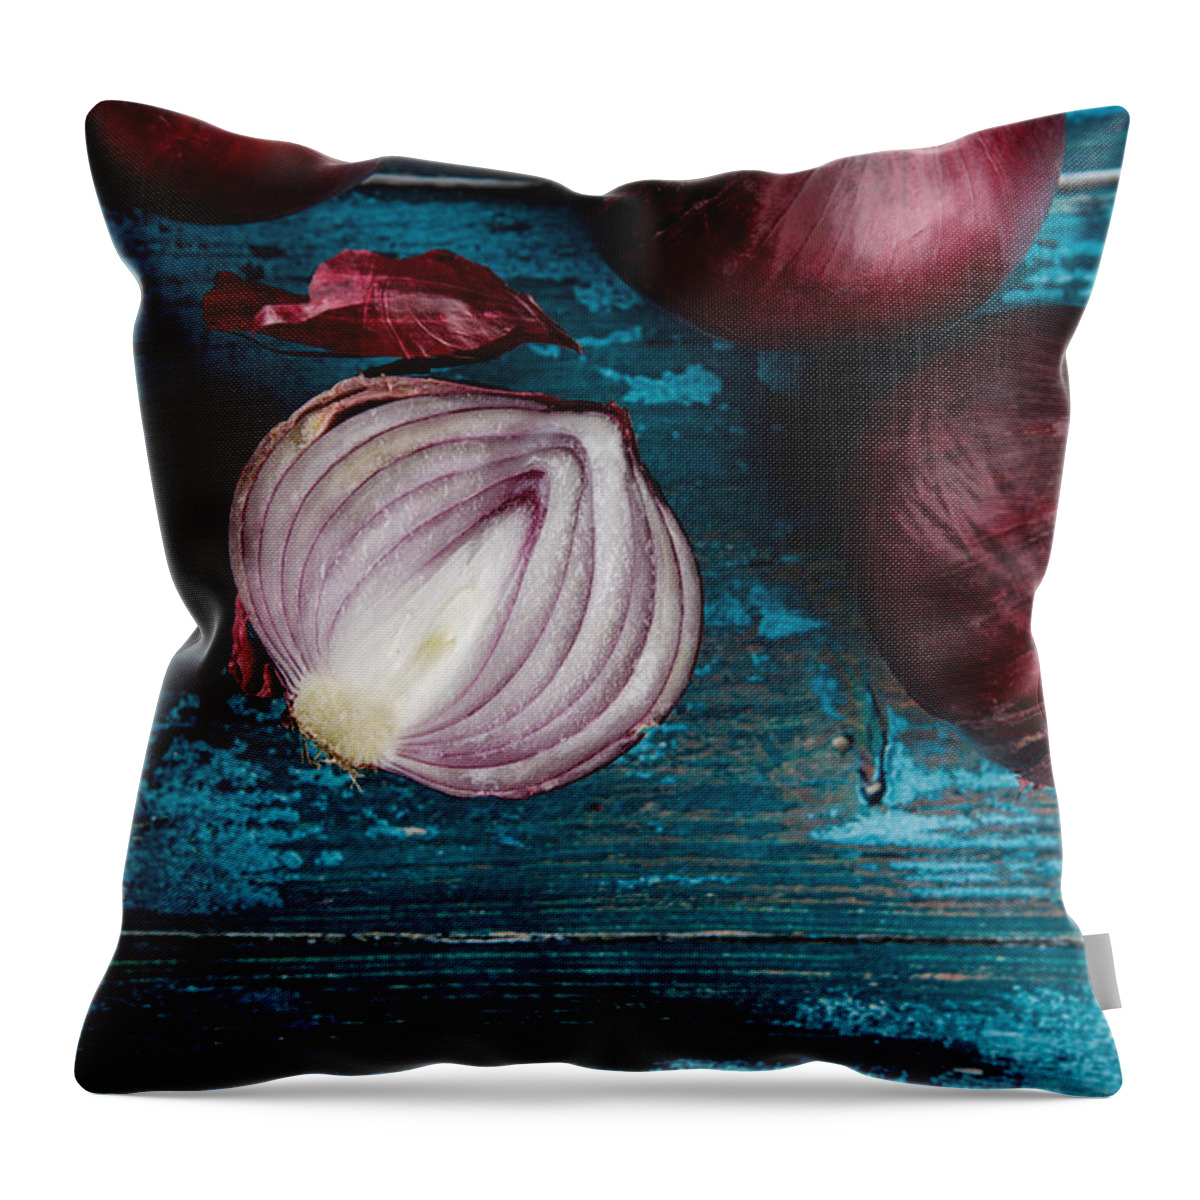 Onion Throw Pillow featuring the photograph Red Onions #5 by Nailia Schwarz